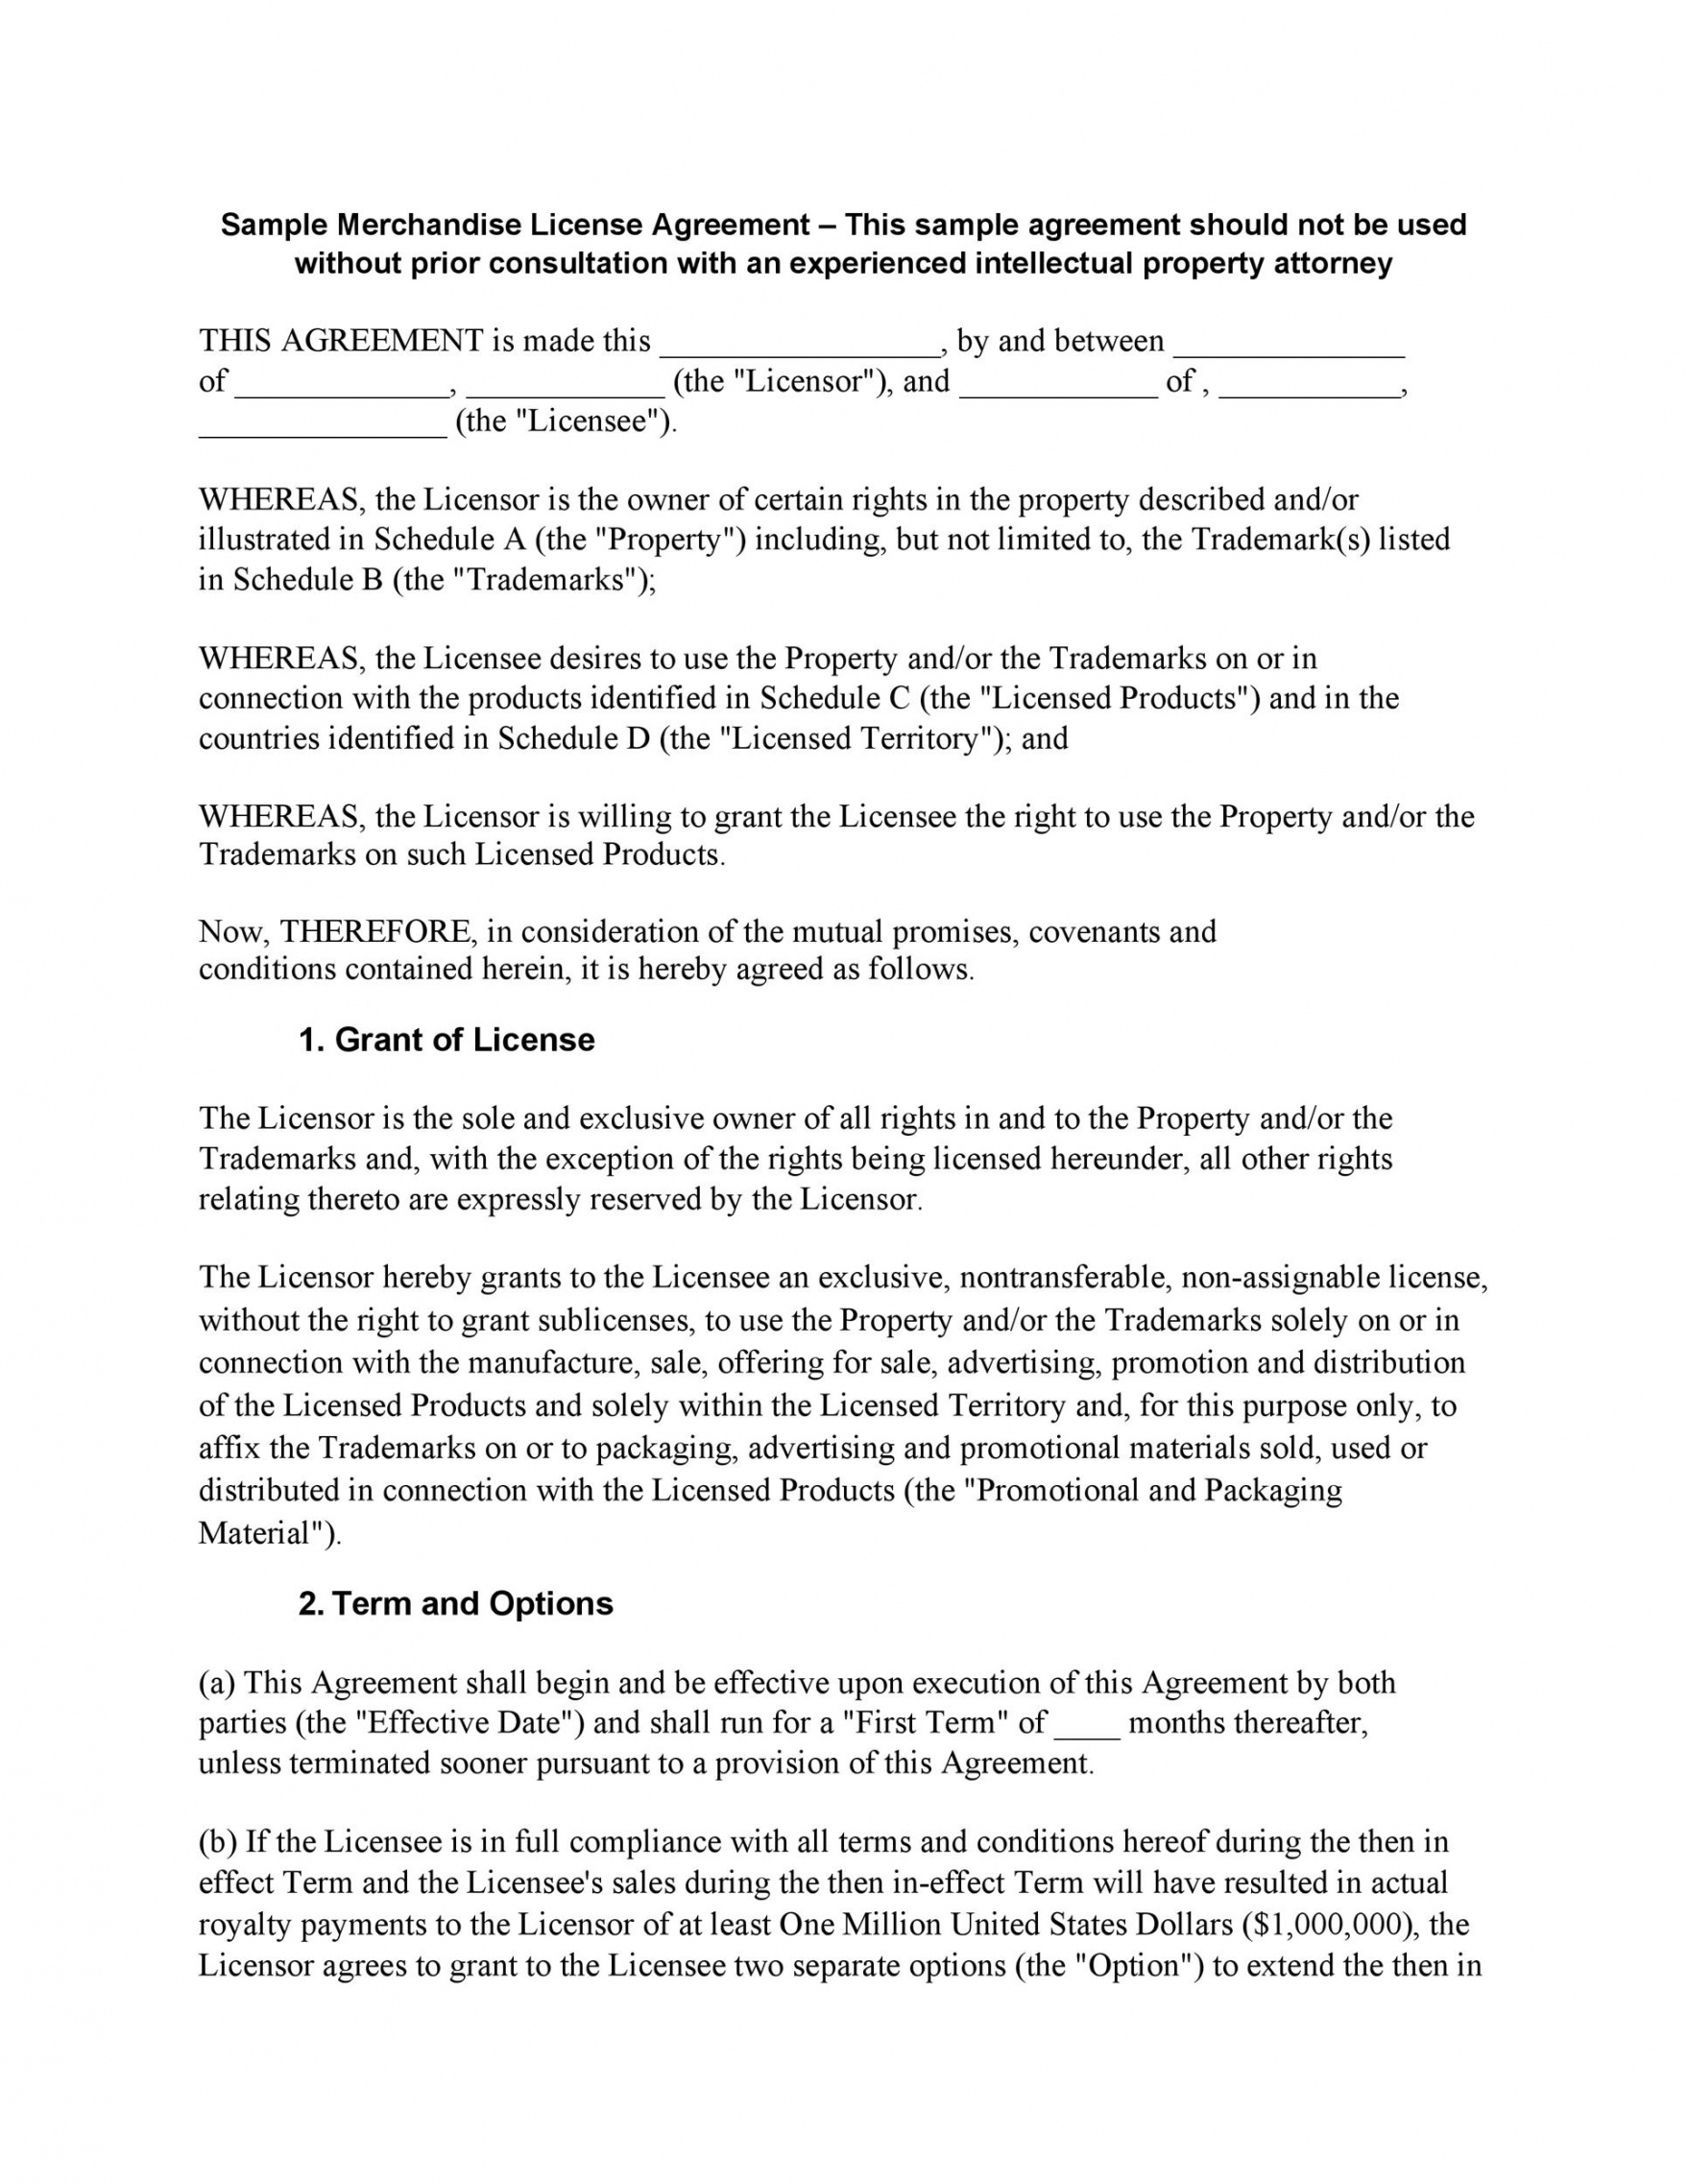 50 professional license agreement templates ᐅ templatelab intellectual property license agreement template pdf